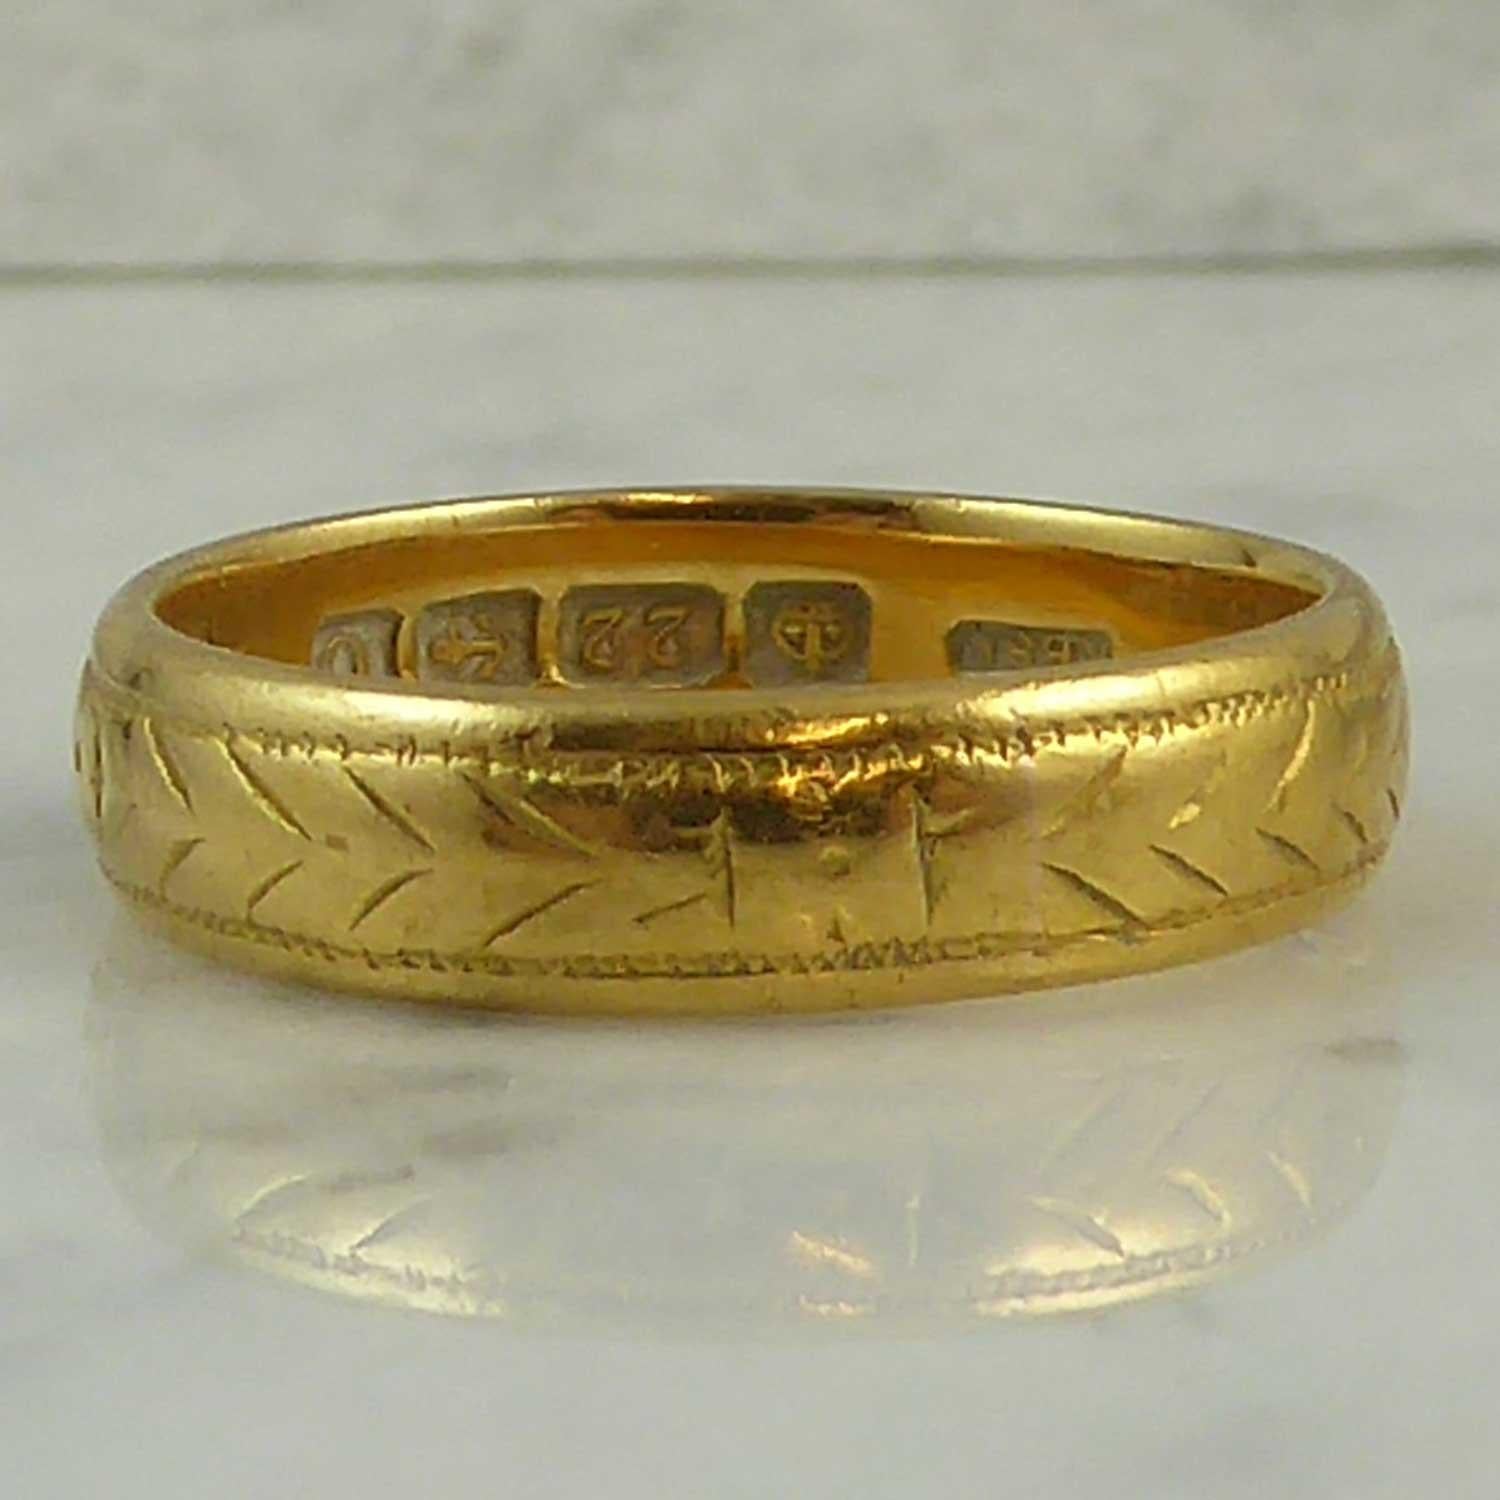 A vintage wedding ring hallmarked at the Birmingham Assay Office in 1938.  Fashioned in warm 22ct yellow gold the ring features a delicate chevron pattern all around.  Finger size  5 7/8 (US/Canada); L1/2 (UK/Australia).